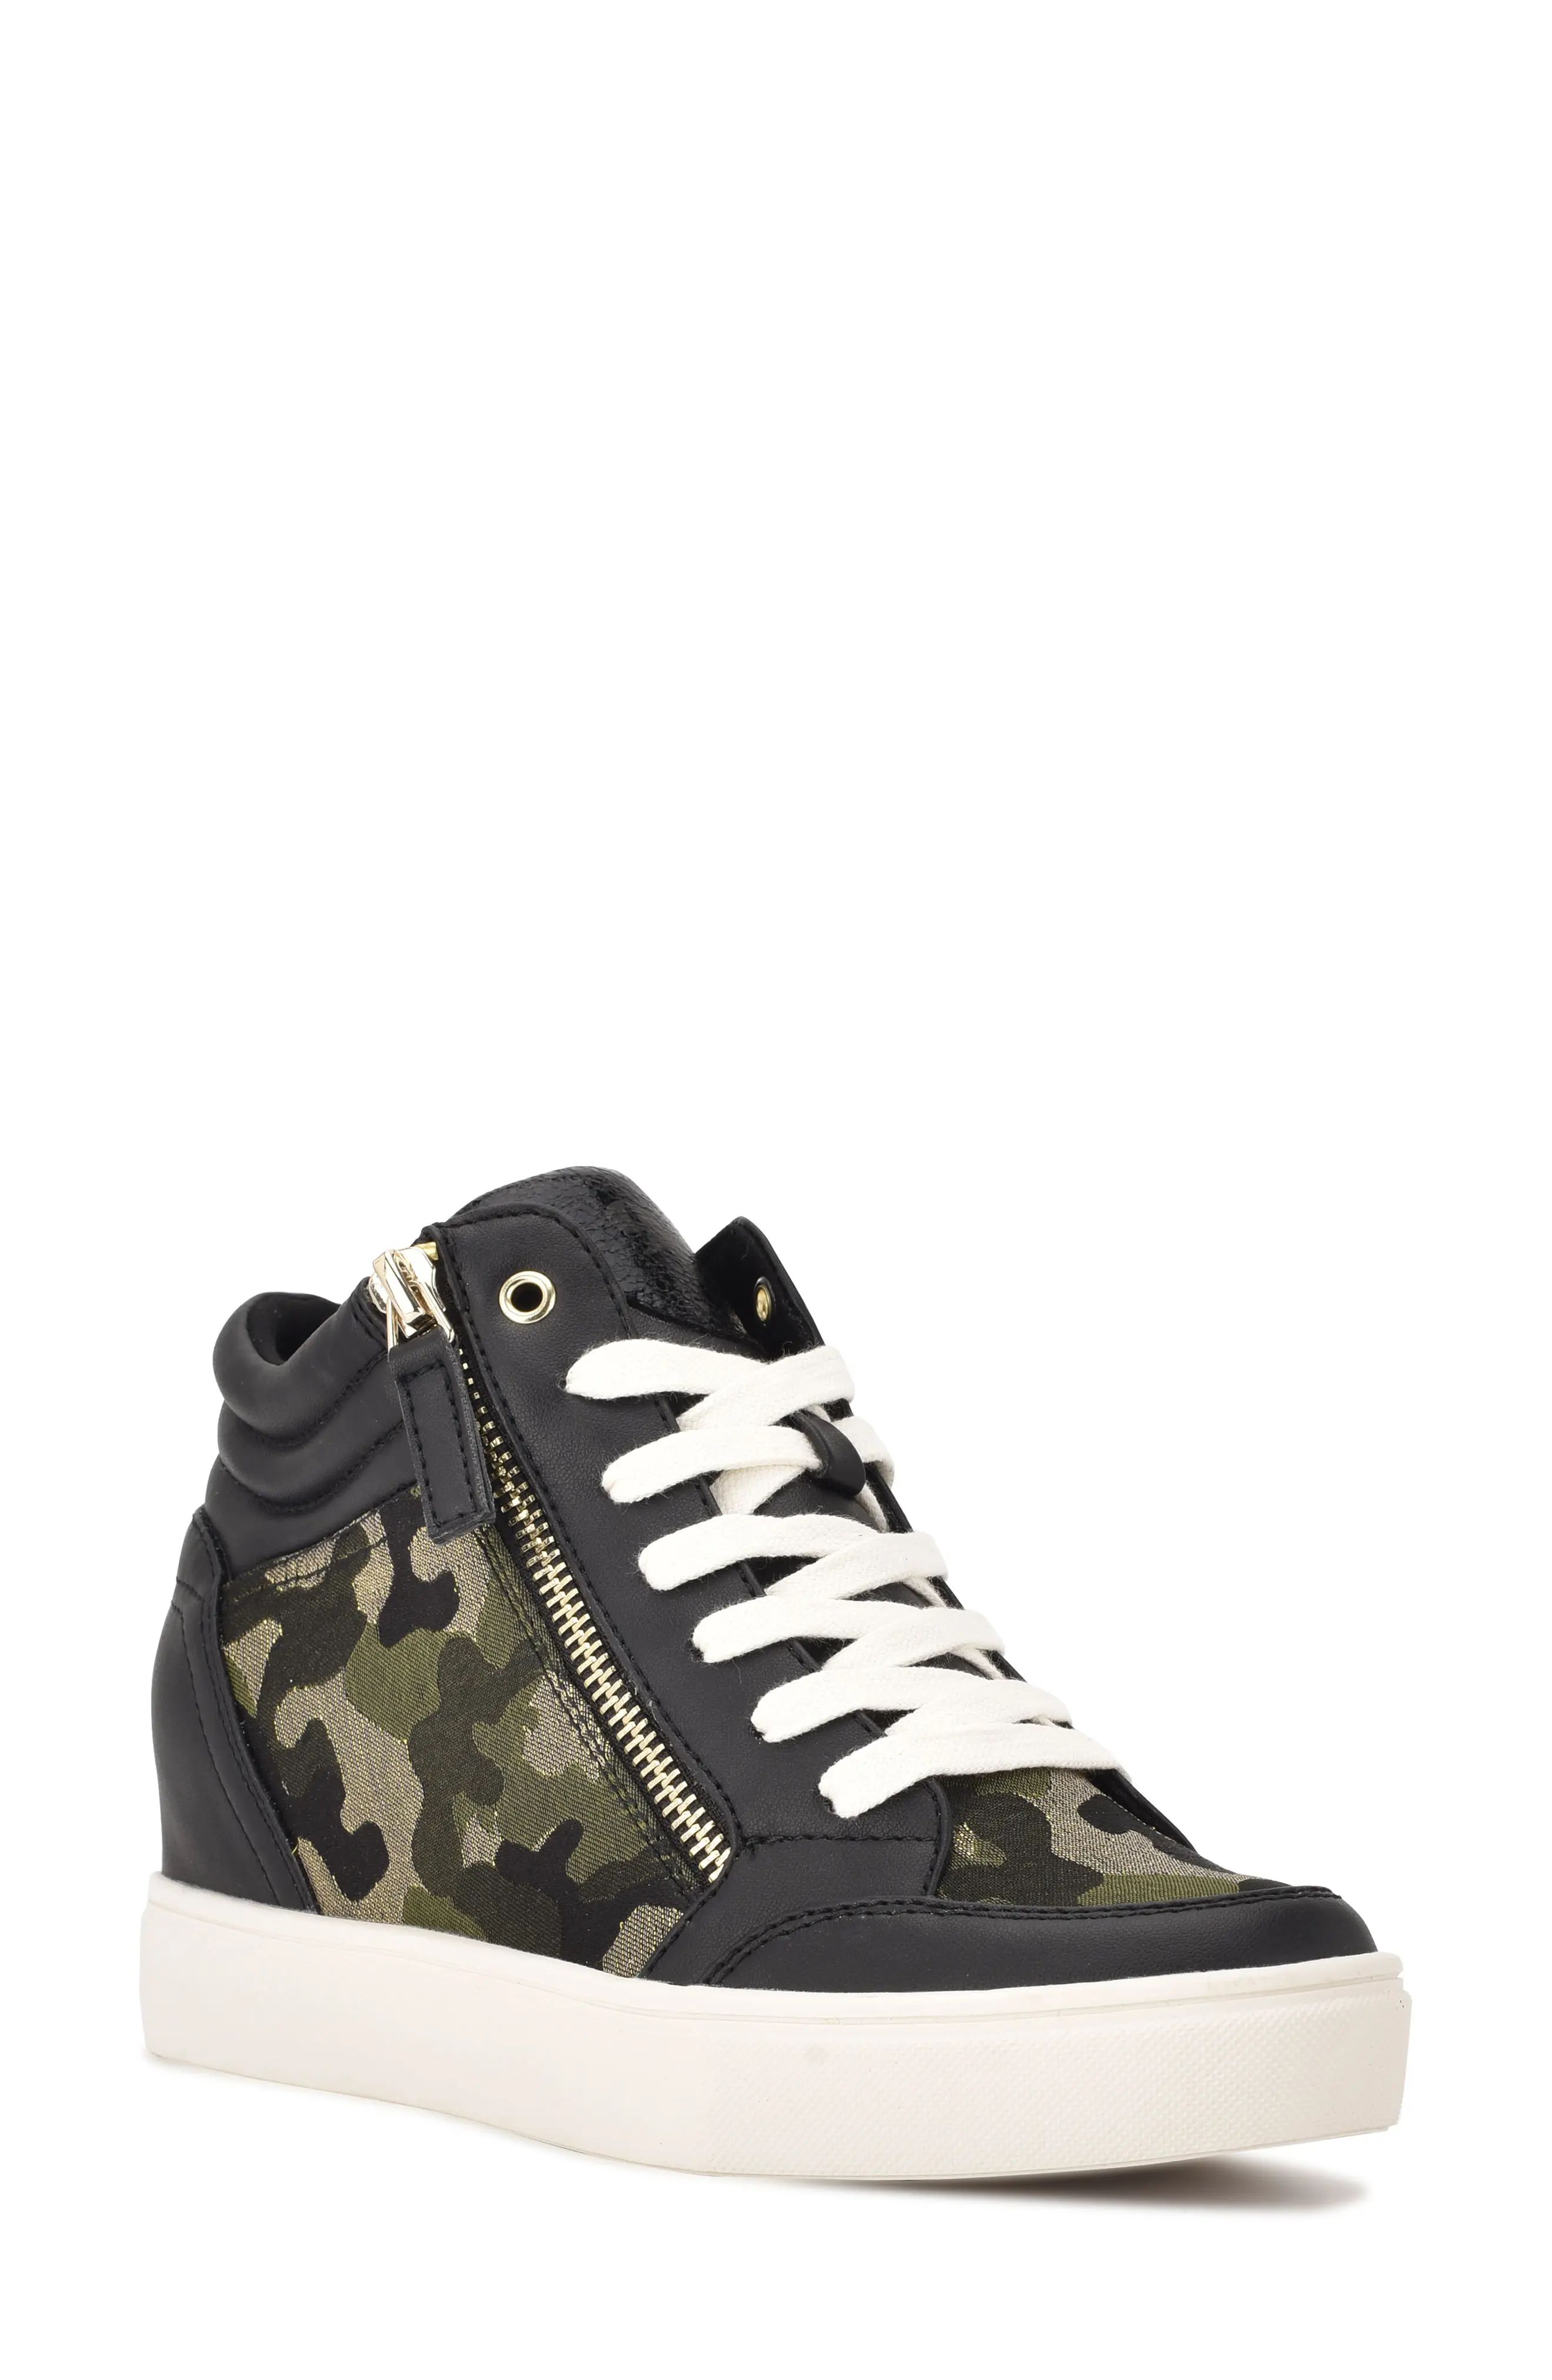 Nine West Tons Lace-Up Wedge Sneaker, Size 8 in Black/Camo at Nordstrom | Nordstrom